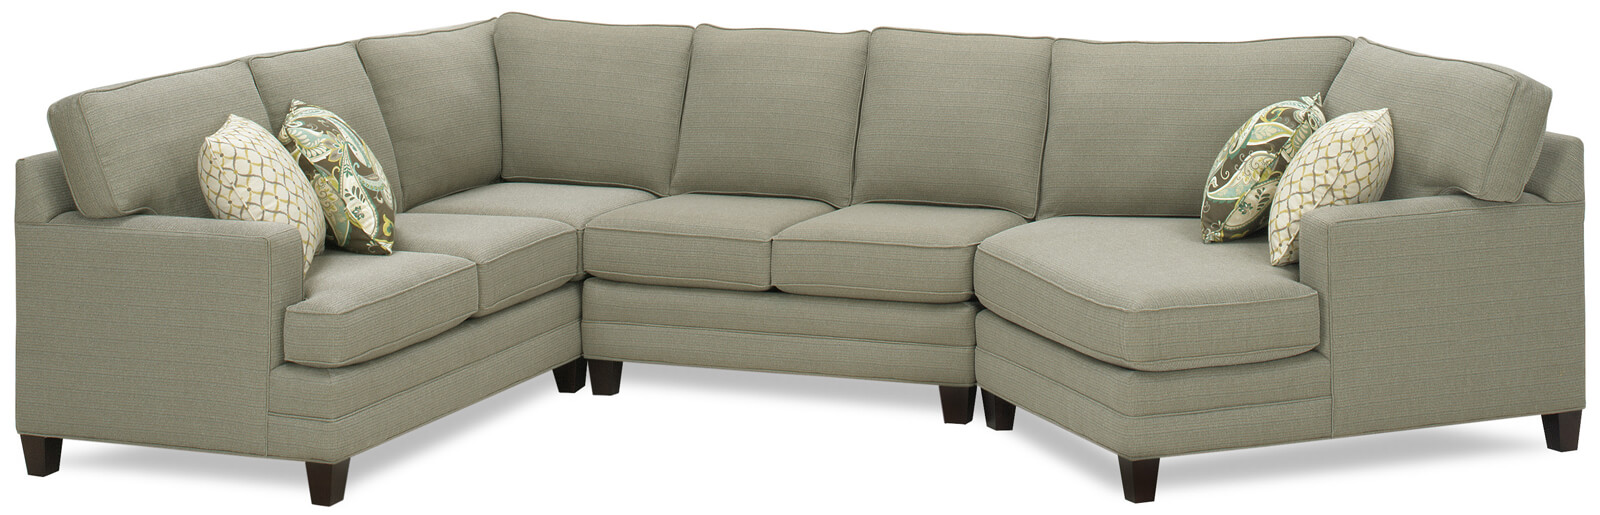 6600 Sectional